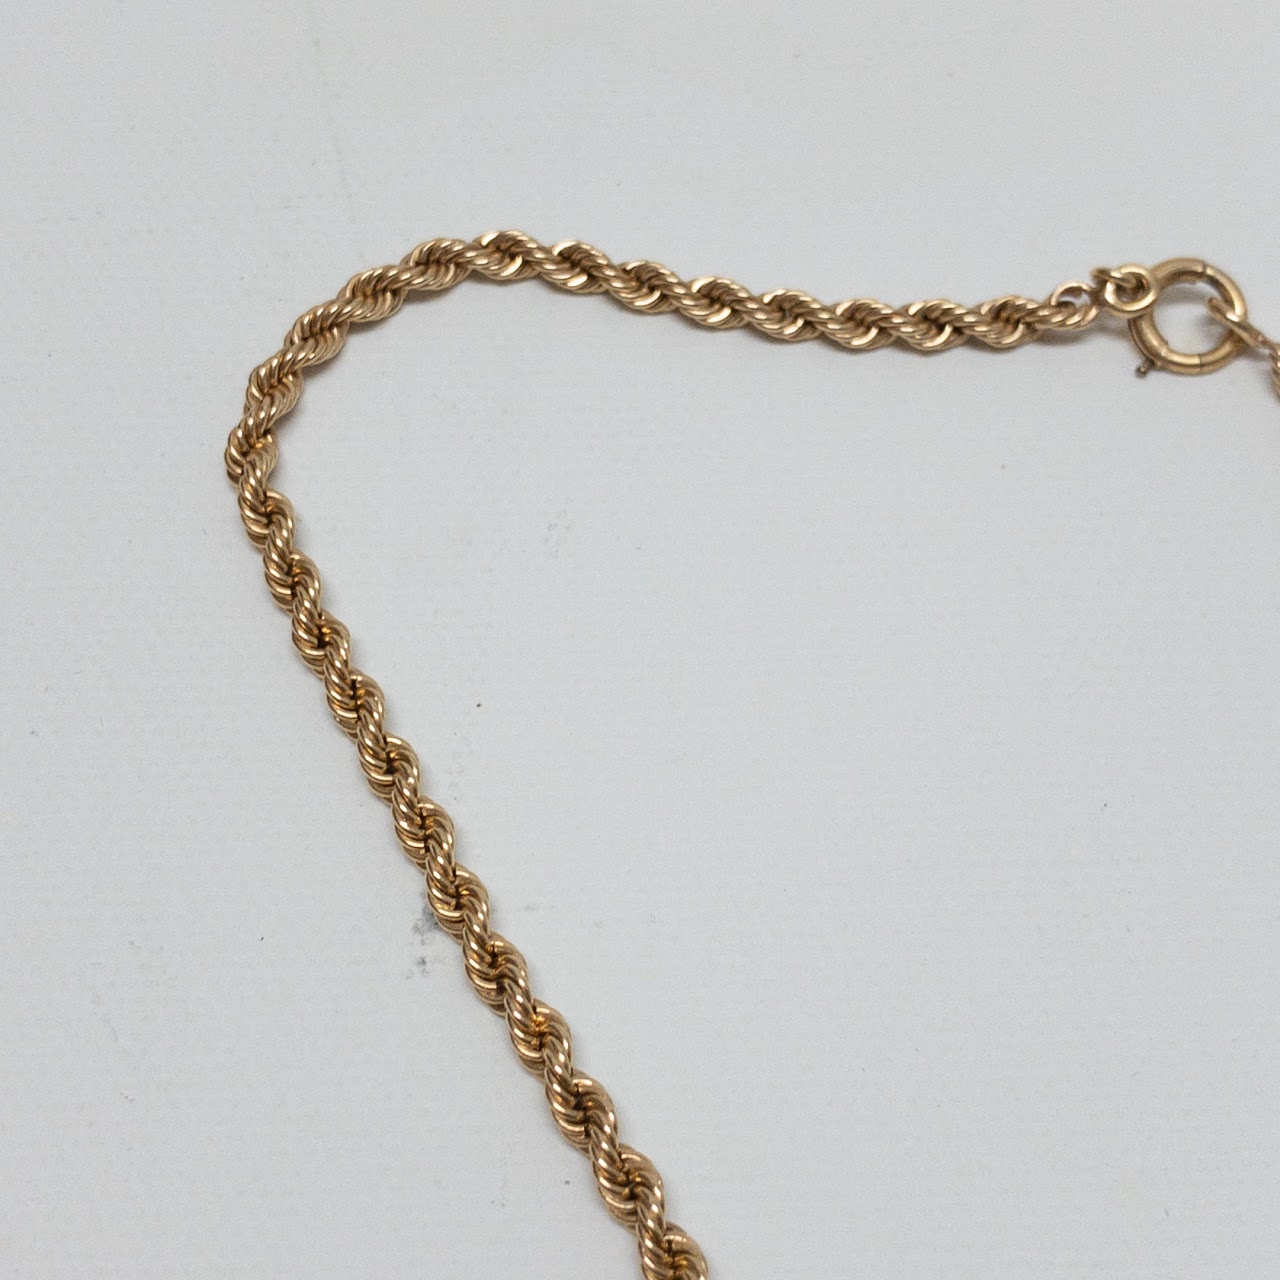 14K Gold and Resin Pendant Necklace